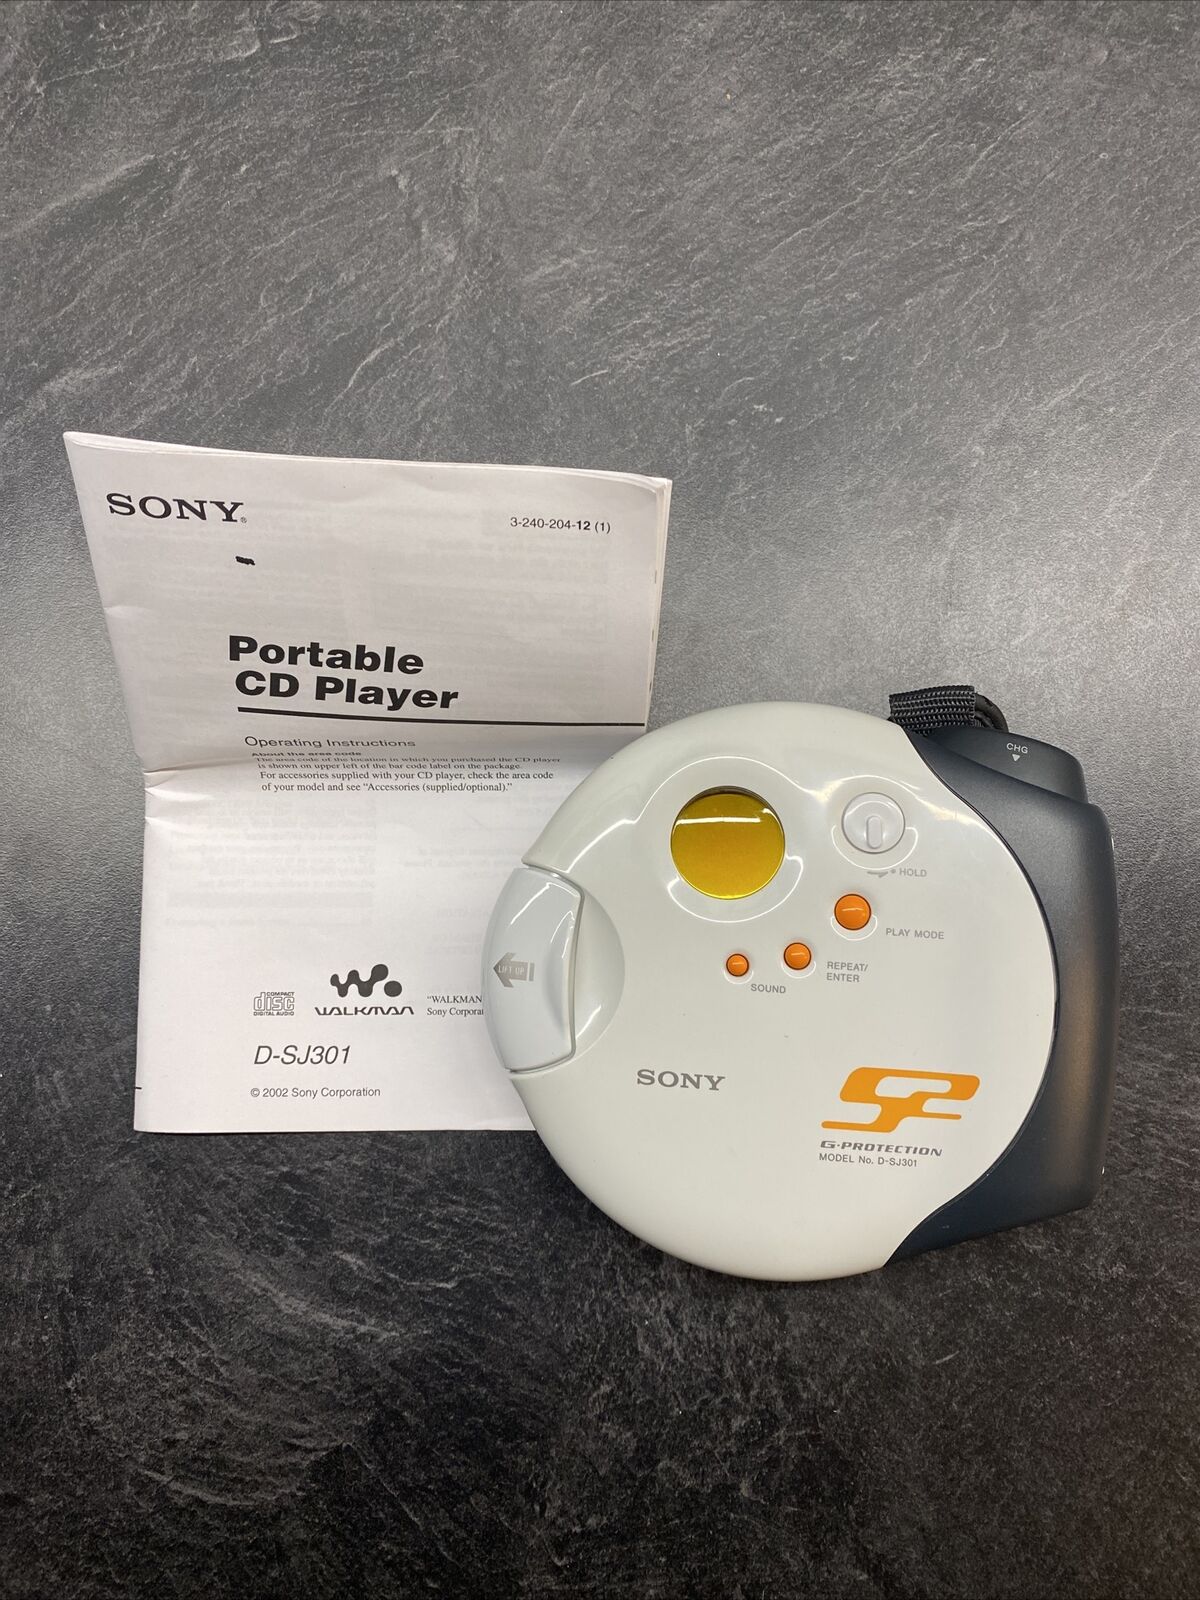 Year 2000 relics - hardware - Sony 324020412 1 Portable Cd Player Chg Operating instructions upper les of the bar code label on the package wapy For accessories supplied with your Cd player, check the area code of your model and see "Accessories suppliedo